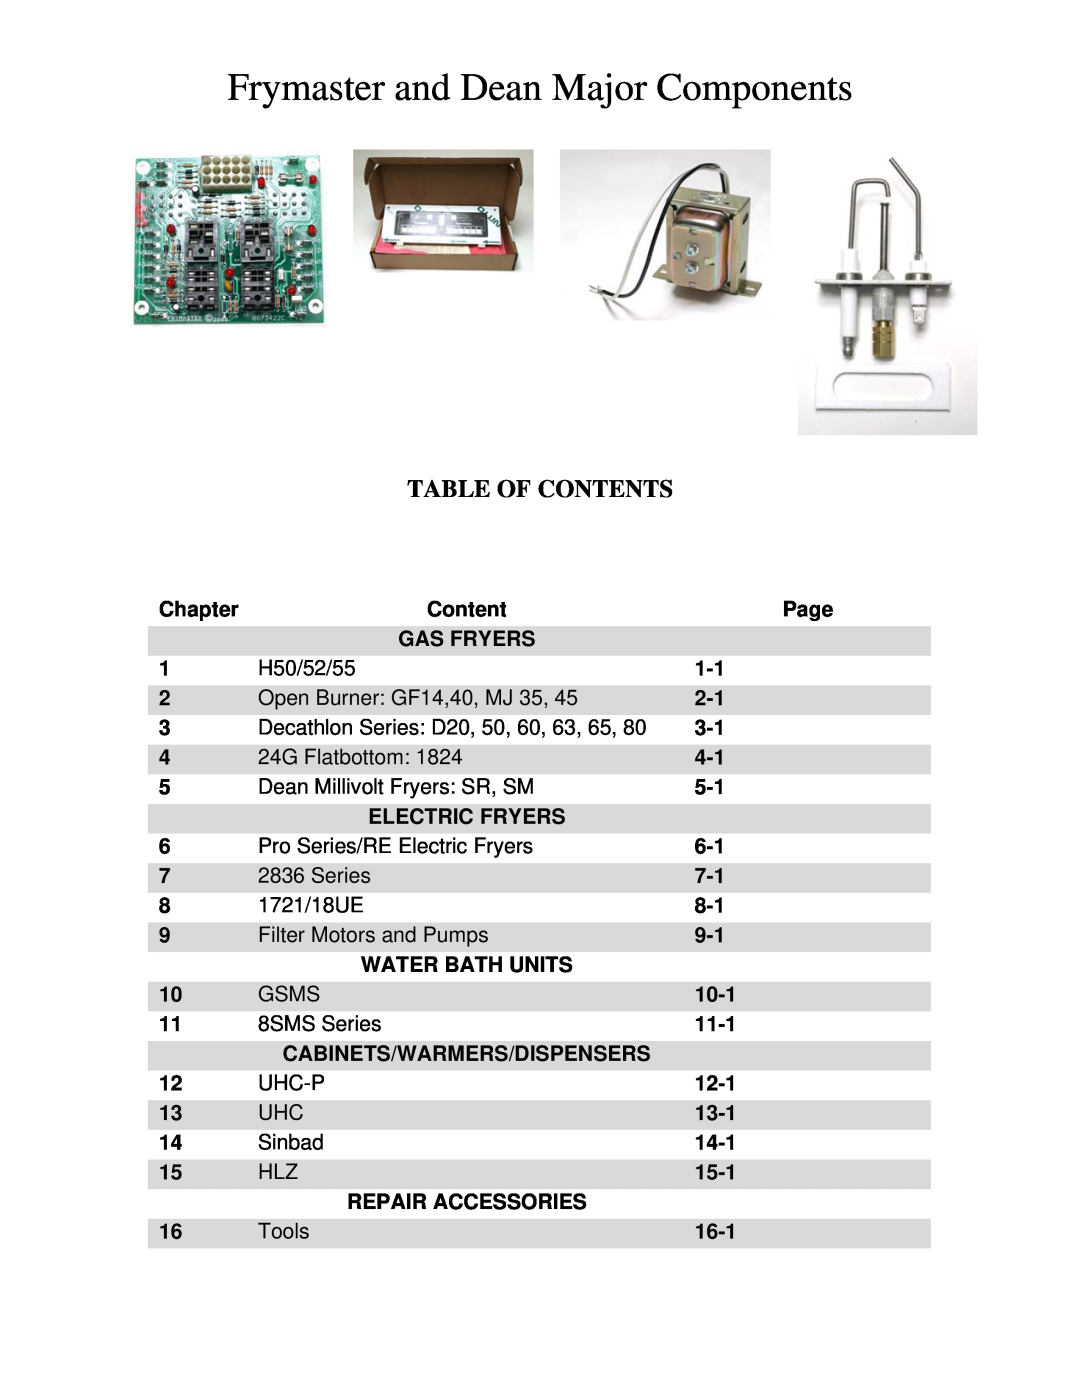 Frymaster 8196321 manual Frymaster and Dean Major Components, Table Of Contents 